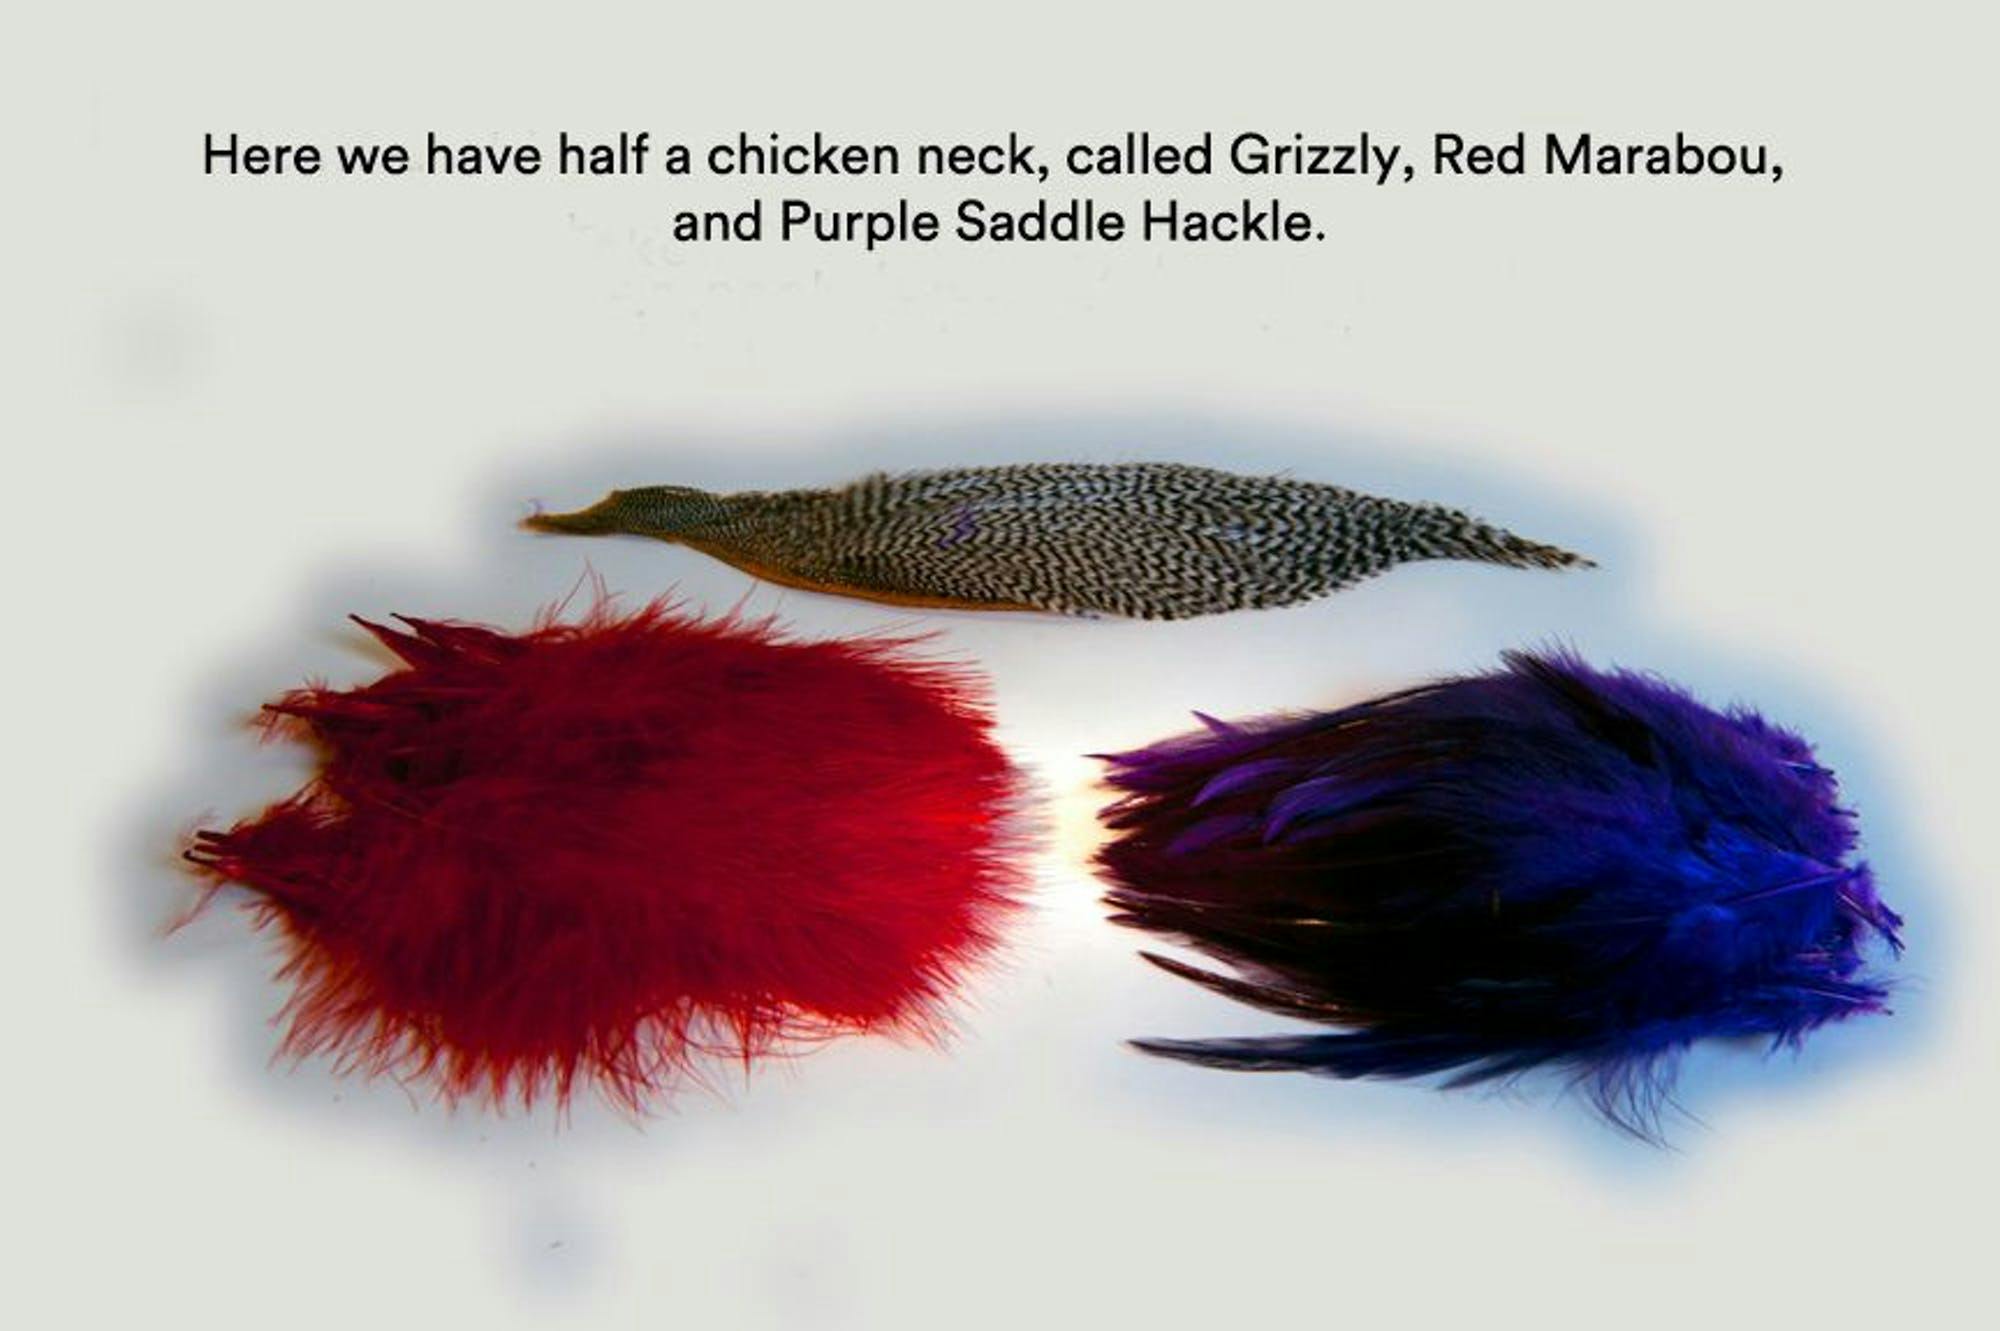 Three tufts of feathers sit on a white background. On the left, is a red tuft. In the middle and above the two others is a speckled black and white tuft. On the right is a deep purple tuft. The text reads, "Here we have half a chicken next, called Grizzly, Red Marabou, and Purple Saddle Hackle."